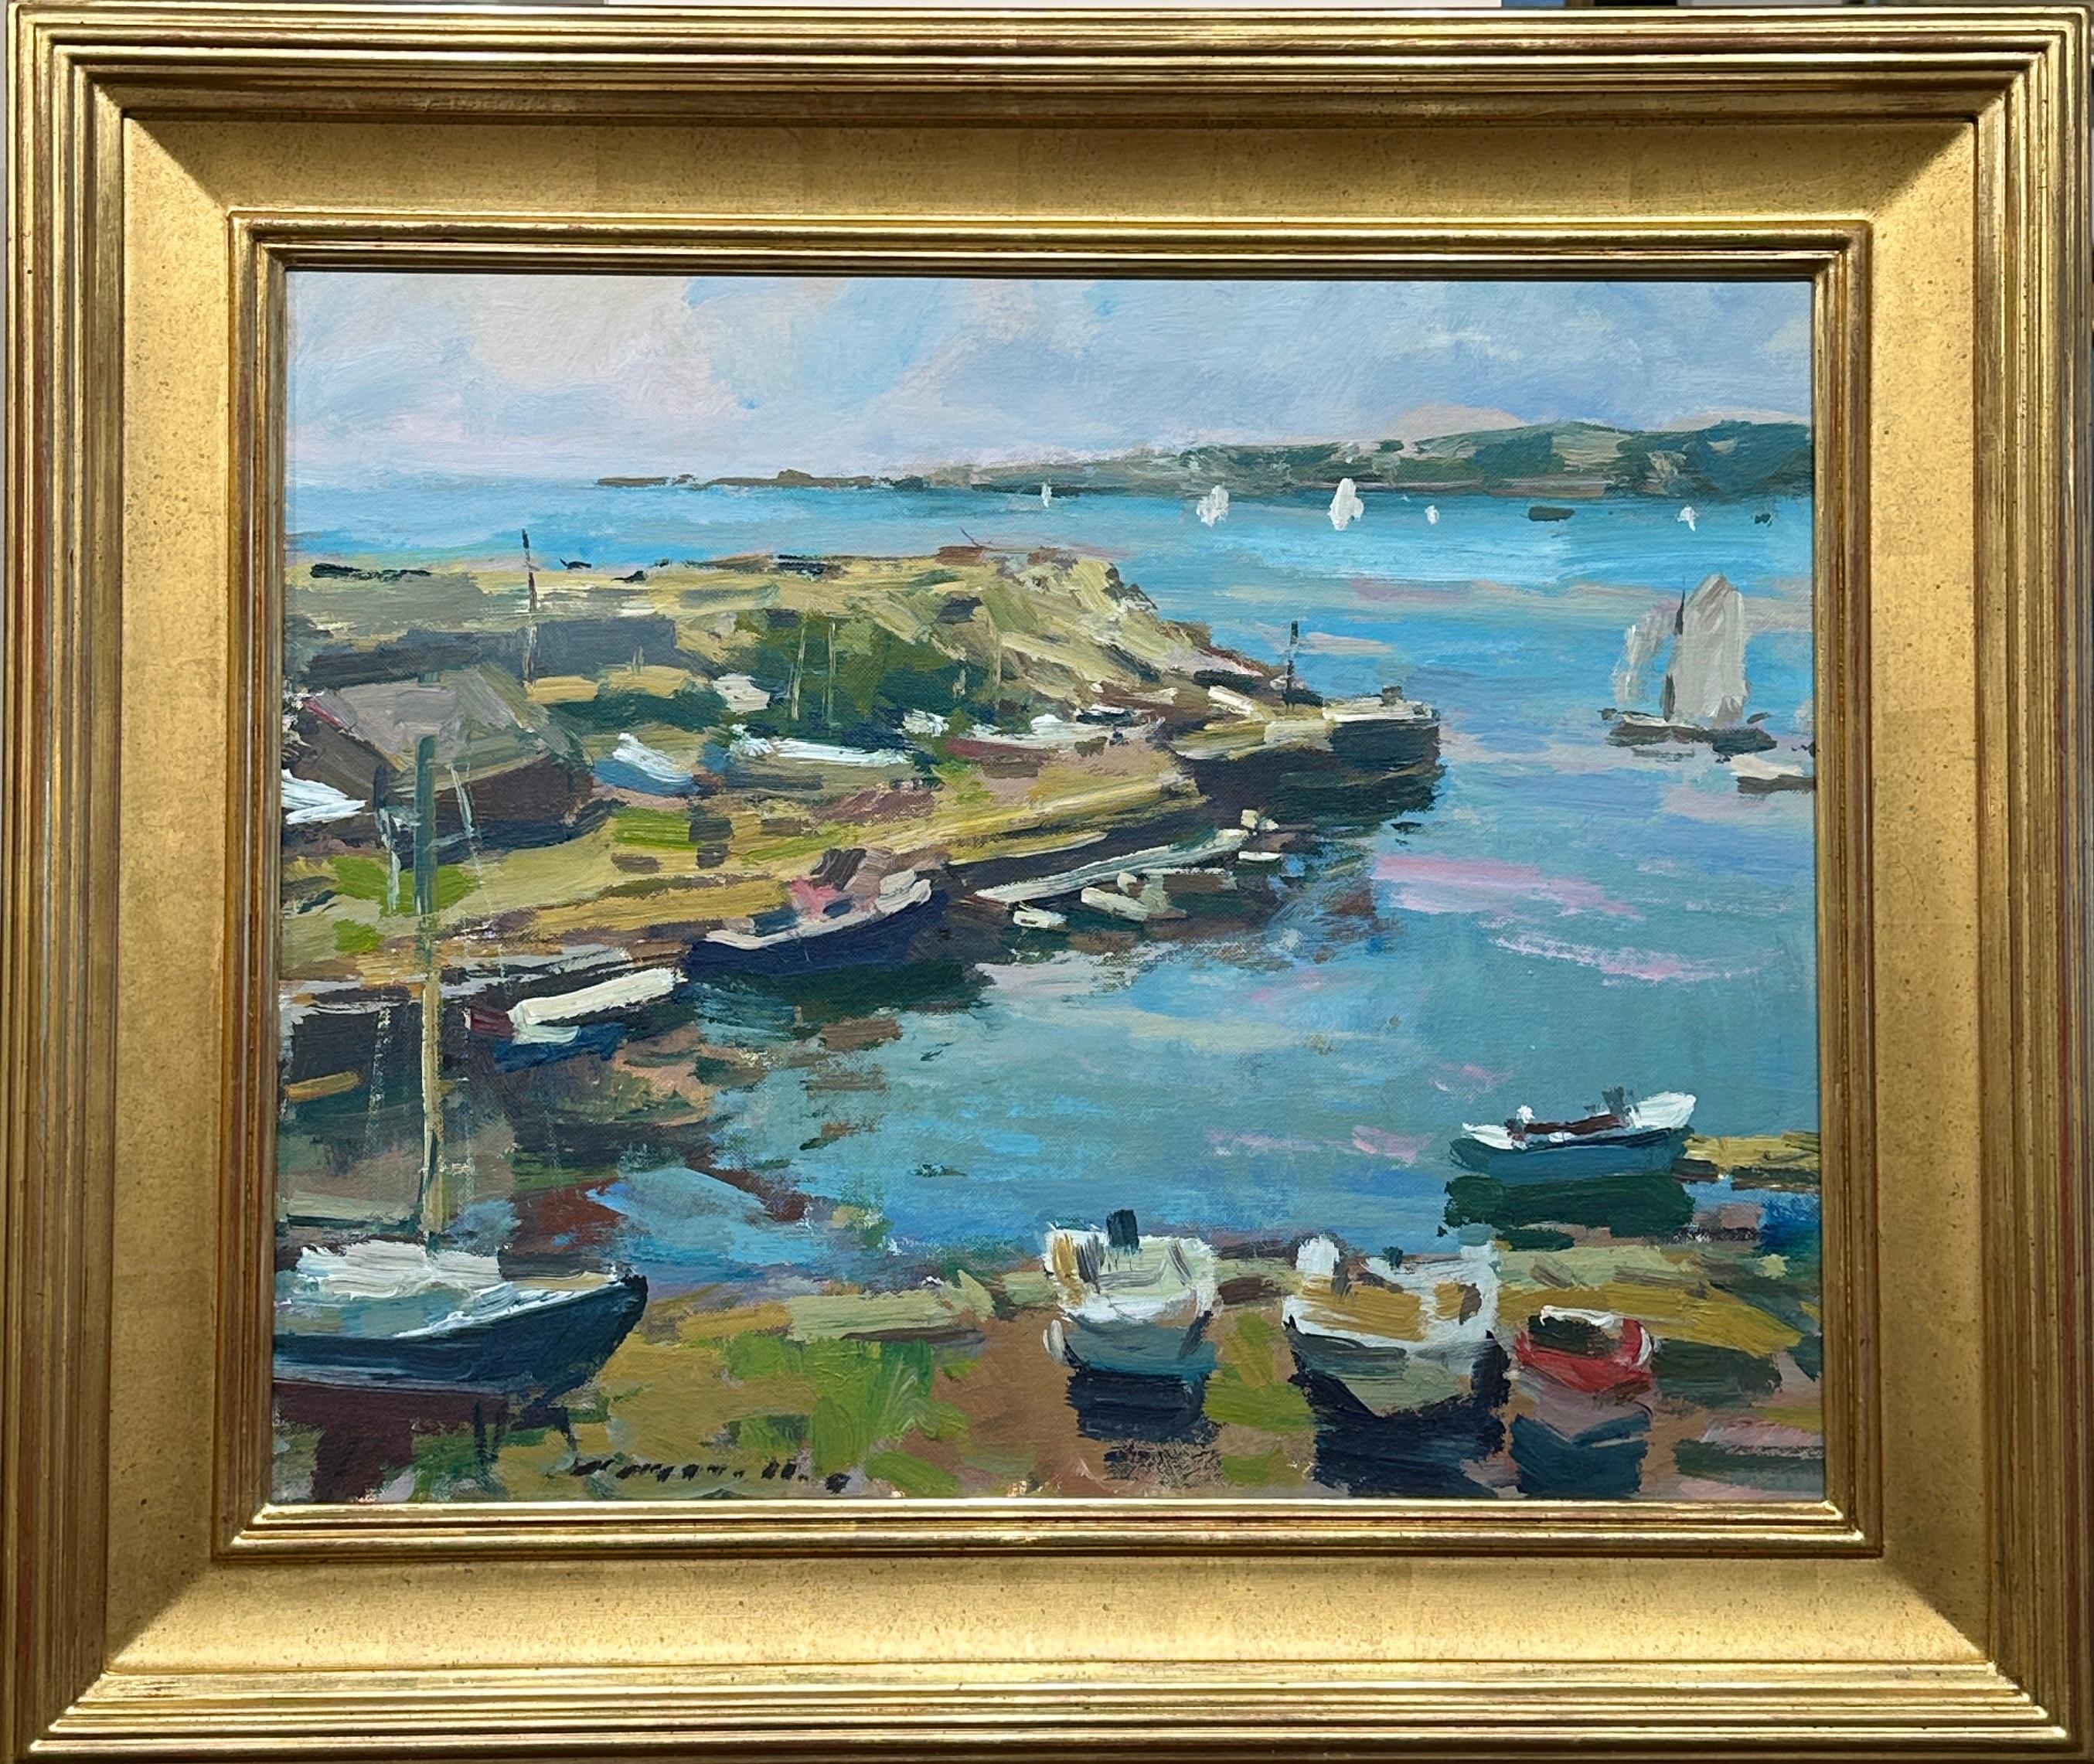 A wonderfully strong example of Pigeon Cove in Rockport, MA.  Housed in a 22k gold leaf hand-made PSArt frame.  

Charles Movalli (1945–2016) had a BA from Clark University and a PhD from the University of Connecticut. He painted and wrote about art